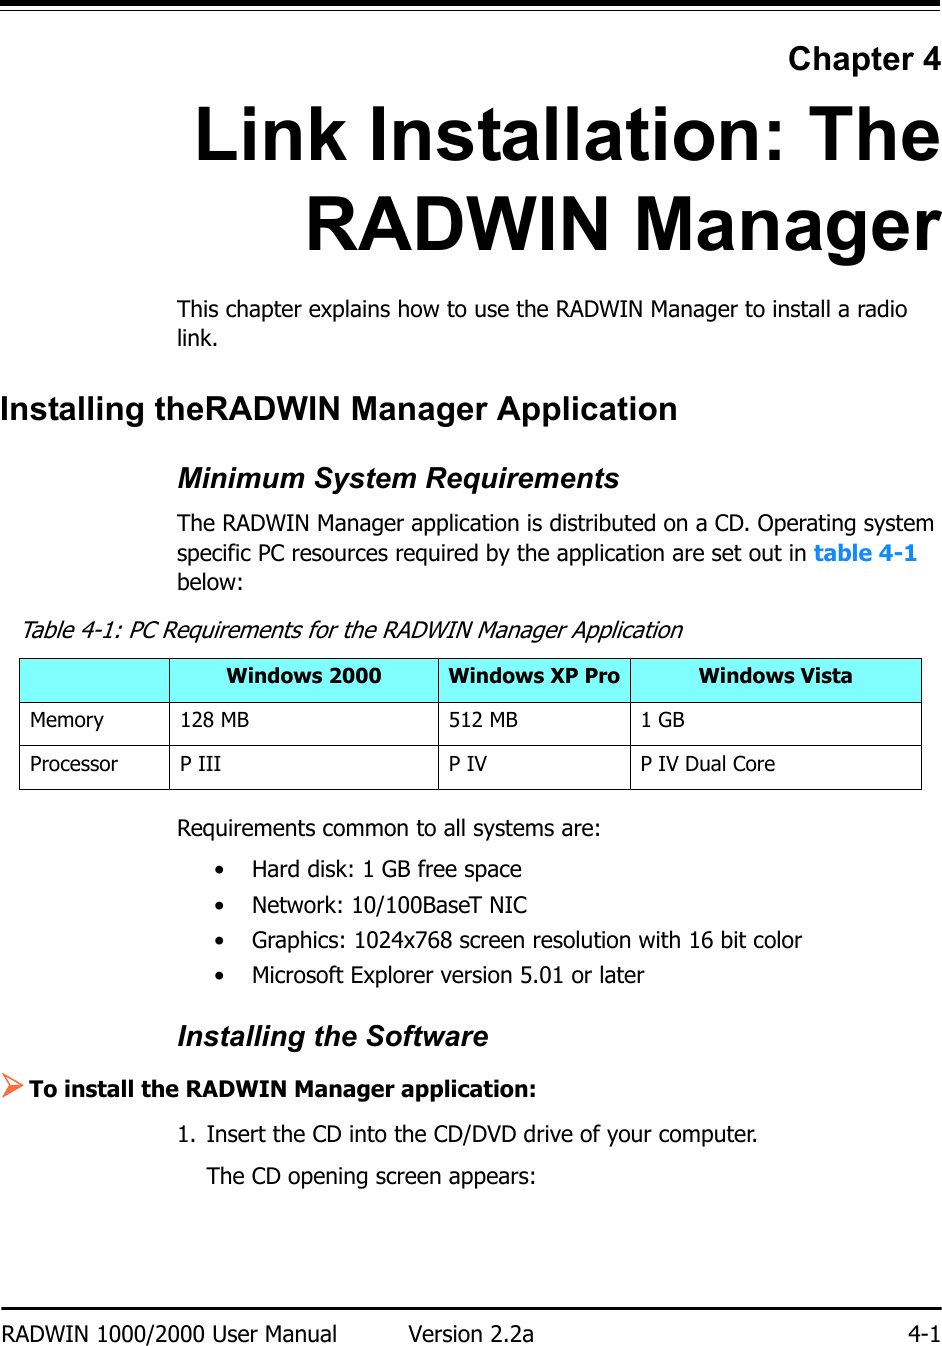 RADWIN 1000/2000 User Manual Version 2.2a 4-1Chapter 4Link Installation: TheRADWIN ManagerThis chapter explains how to use the RADWIN Manager to install a radio link.Installing theRADWIN Manager ApplicationMinimum System RequirementsThe RADWIN Manager application is distributed on a CD. Operating system specific PC resources required by the application are set out in table 4-1 below:Requirements common to all systems are:• Hard disk: 1 GB free space• Network: 10/100BaseT NIC• Graphics: 1024x768 screen resolution with 16 bit color• Microsoft Explorer version 5.01 or laterInstalling the Software¾To install the RADWIN Manager application:1. Insert the CD into the CD/DVD drive of your computer.The CD opening screen appears:Table 4-1: PC Requirements for the RADWIN Manager ApplicationWindows 2000 Windows XP Pro Windows VistaMemory 128 MB 512 MB 1 GBProcessor P III P IV P IV Dual Core